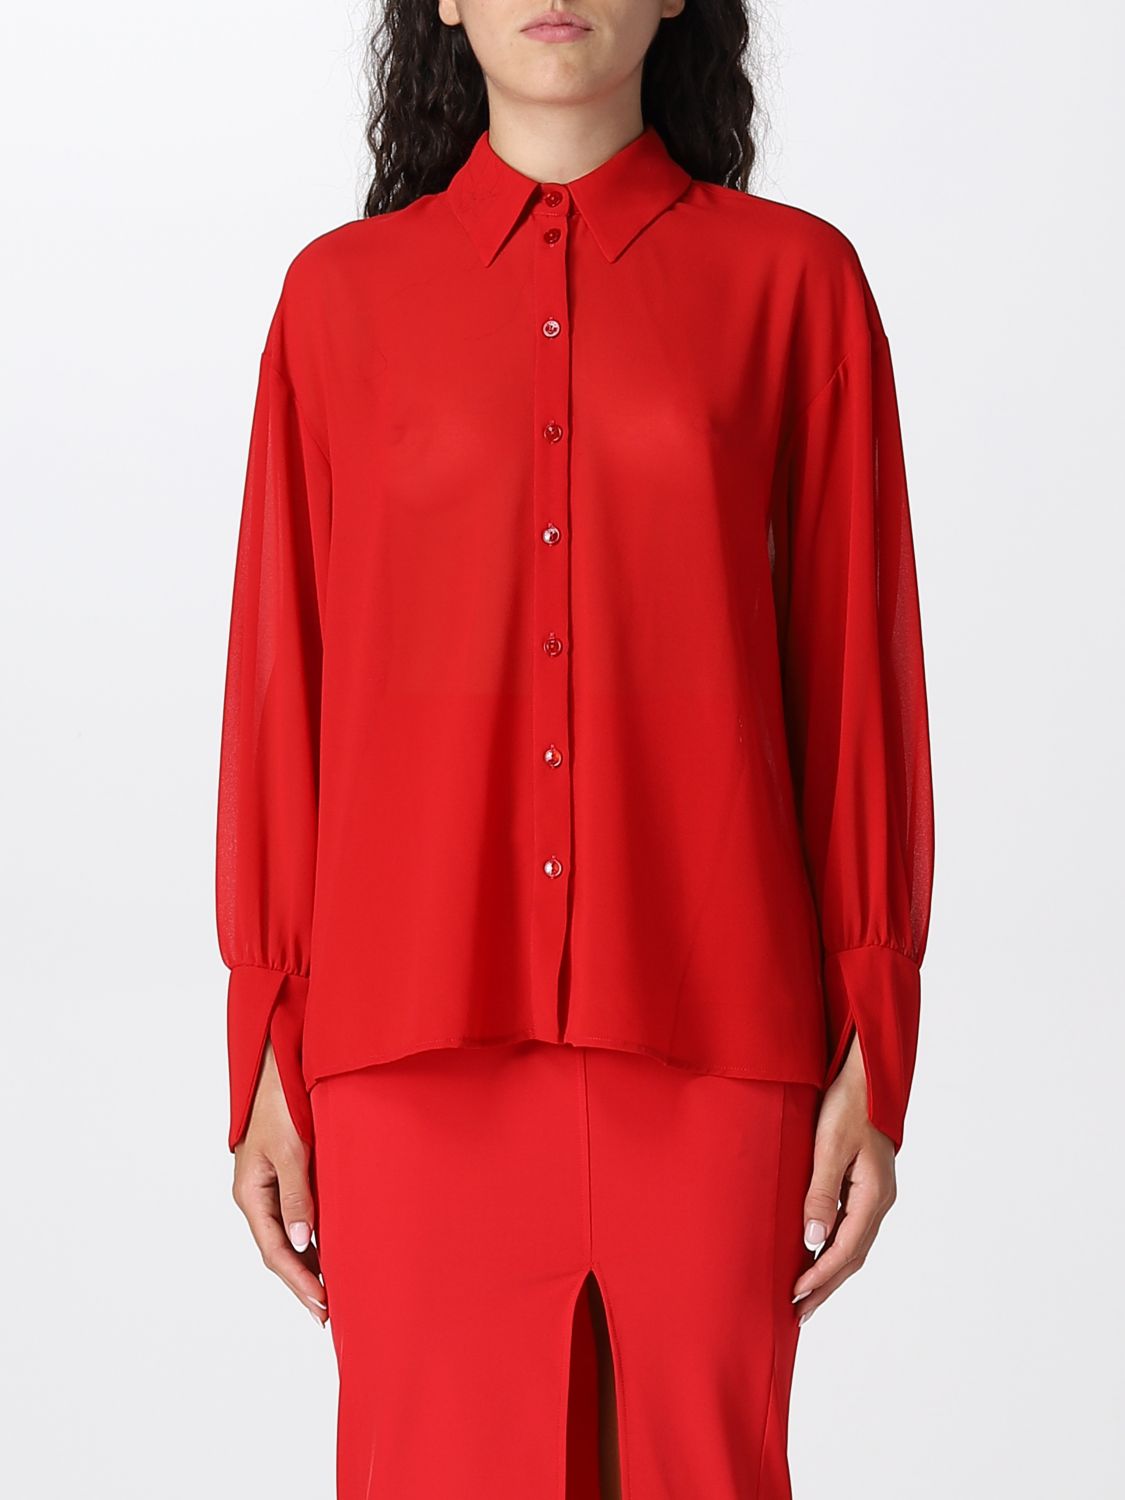 Chemise Patrizia Pepe: Chemise Patrizia Pepe femme rouge 1